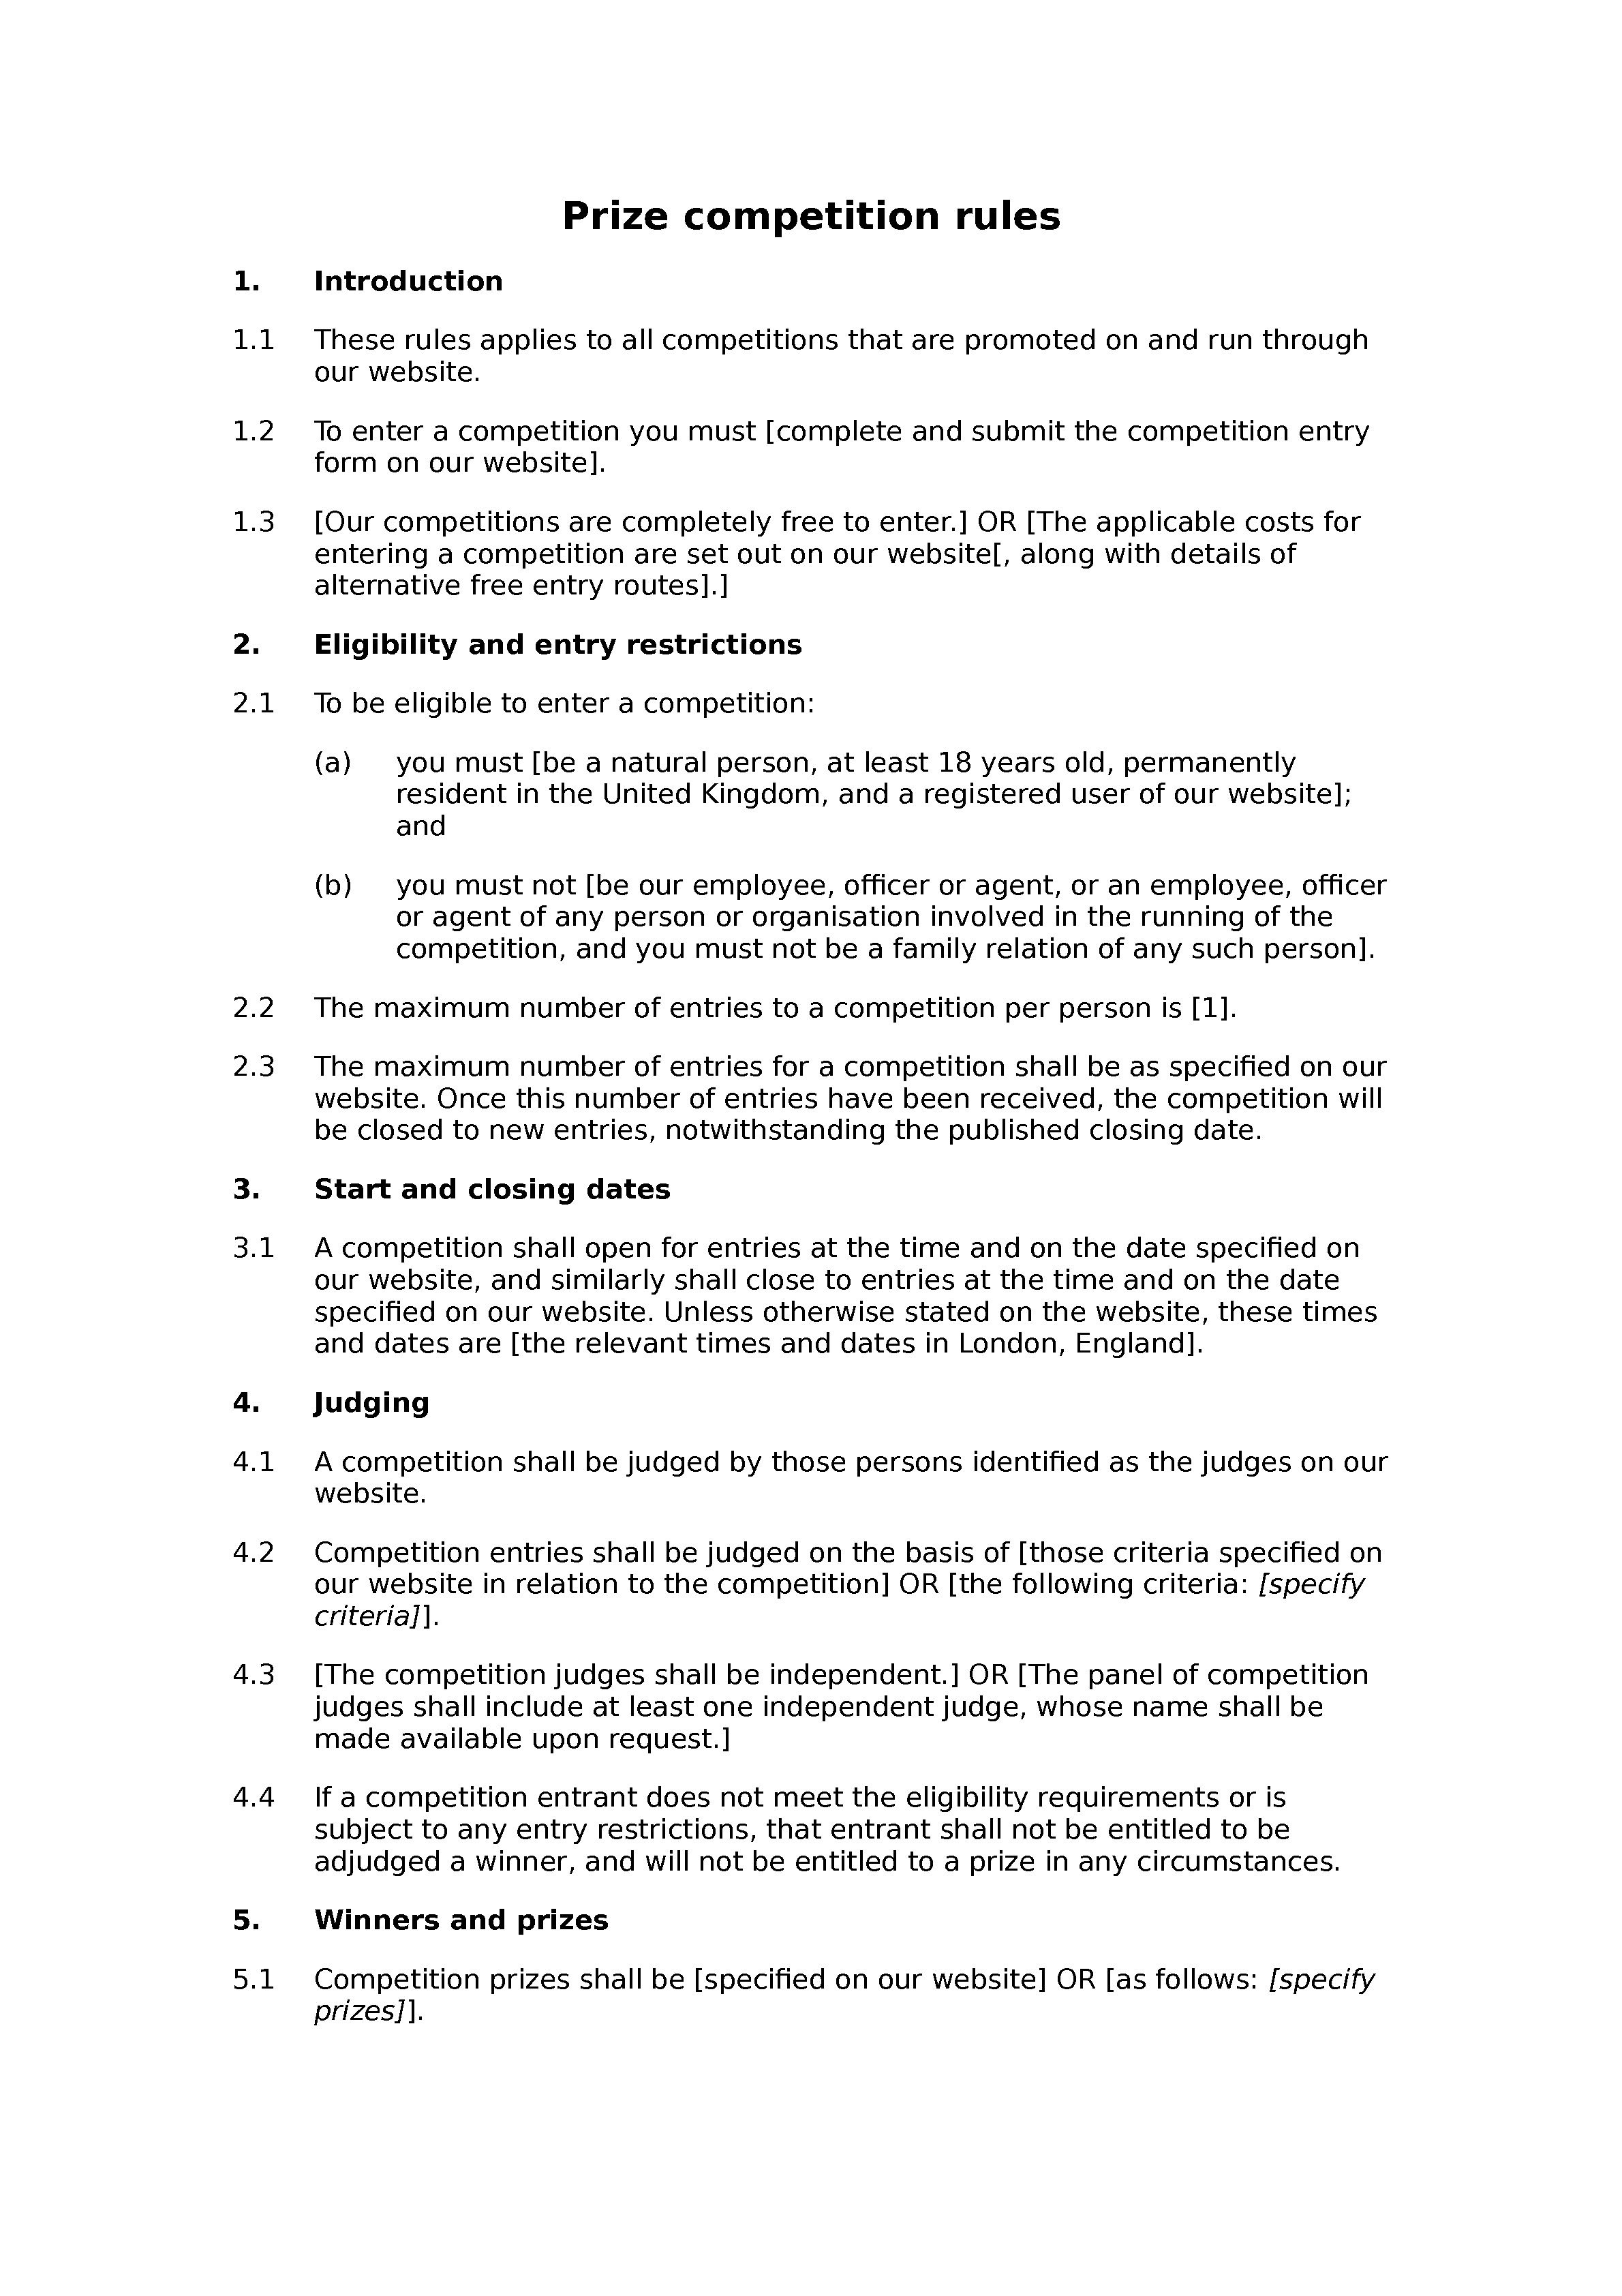 Prize competition rules document preview